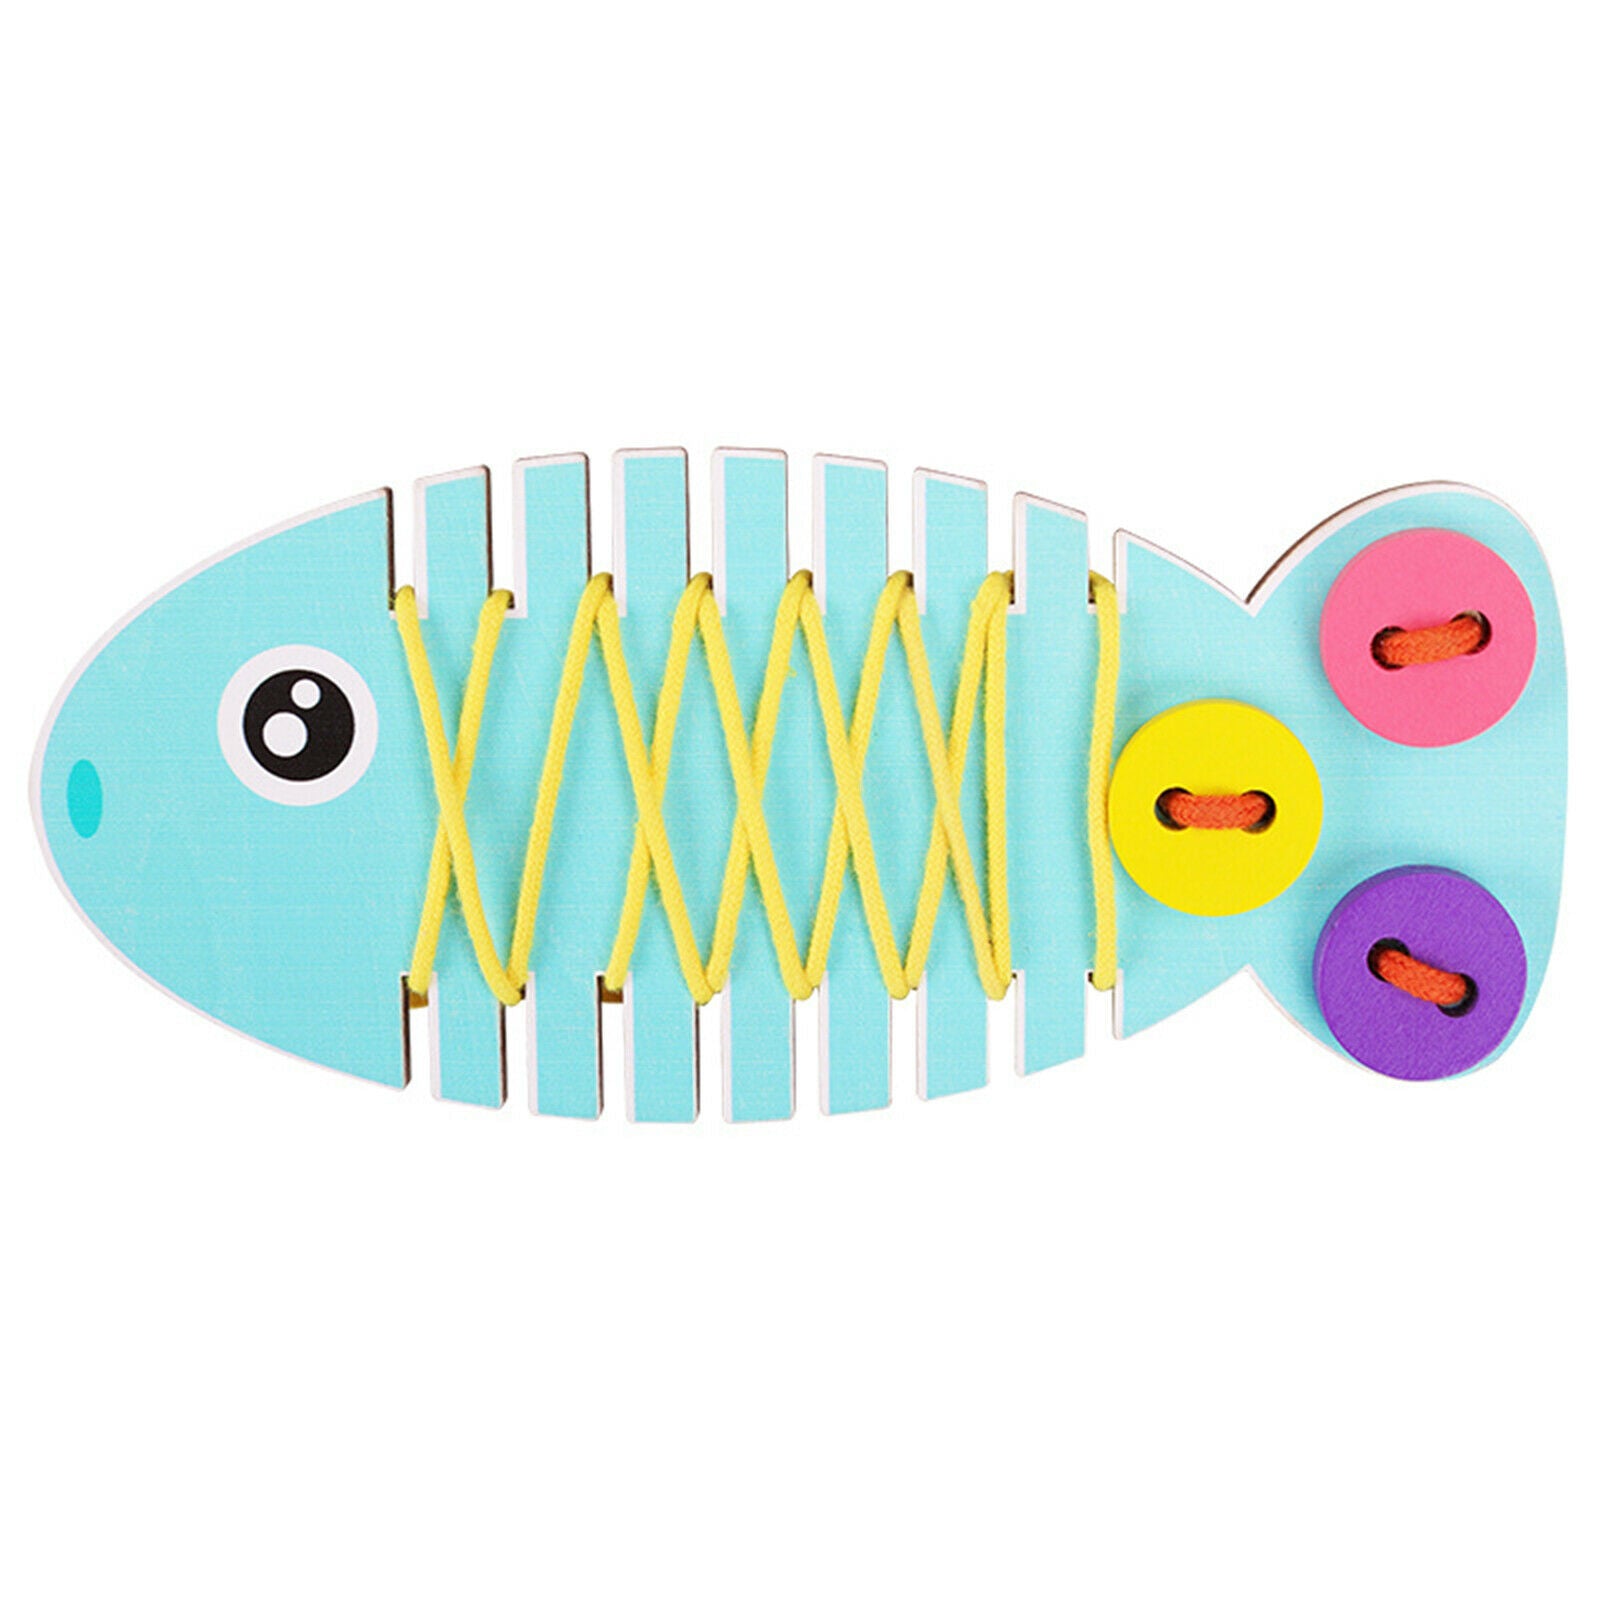 Wooden Threading Line Fish Game Toys Toys for Baby Kids Learning Education